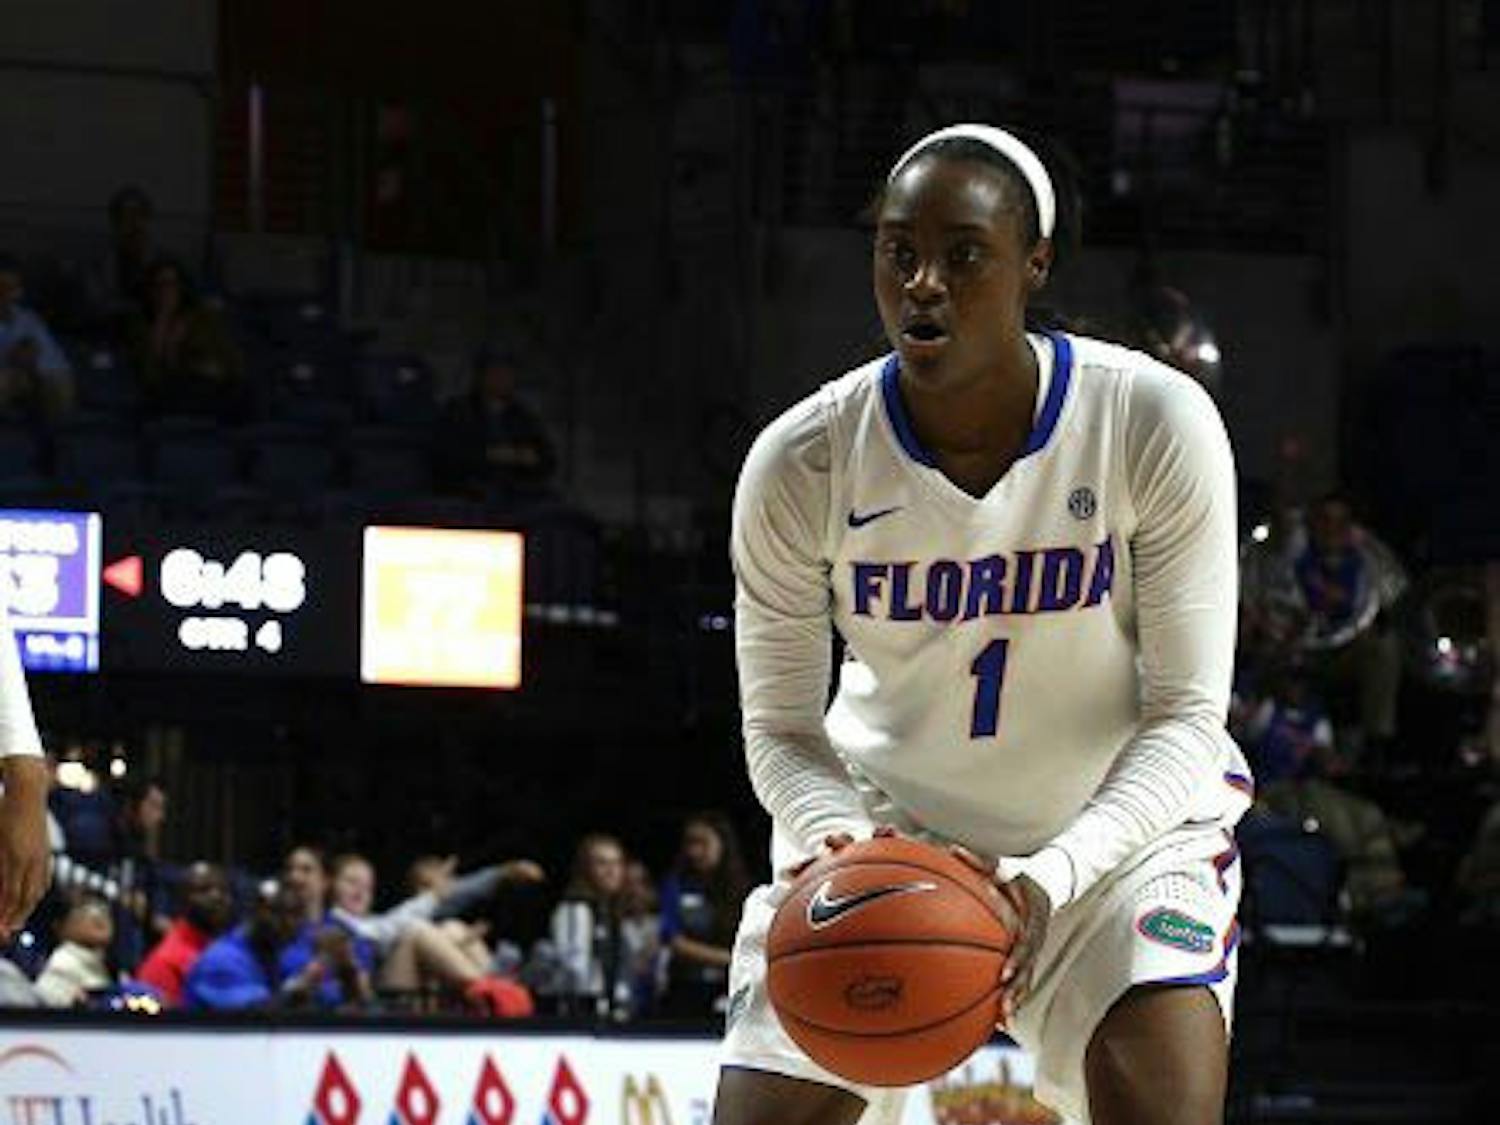 UF forward Ronni Williams prepares to shoot a free throw during Florida's 84-75 loss to Tennessee on Jan. 26, 2017, in the O'Connell Center.